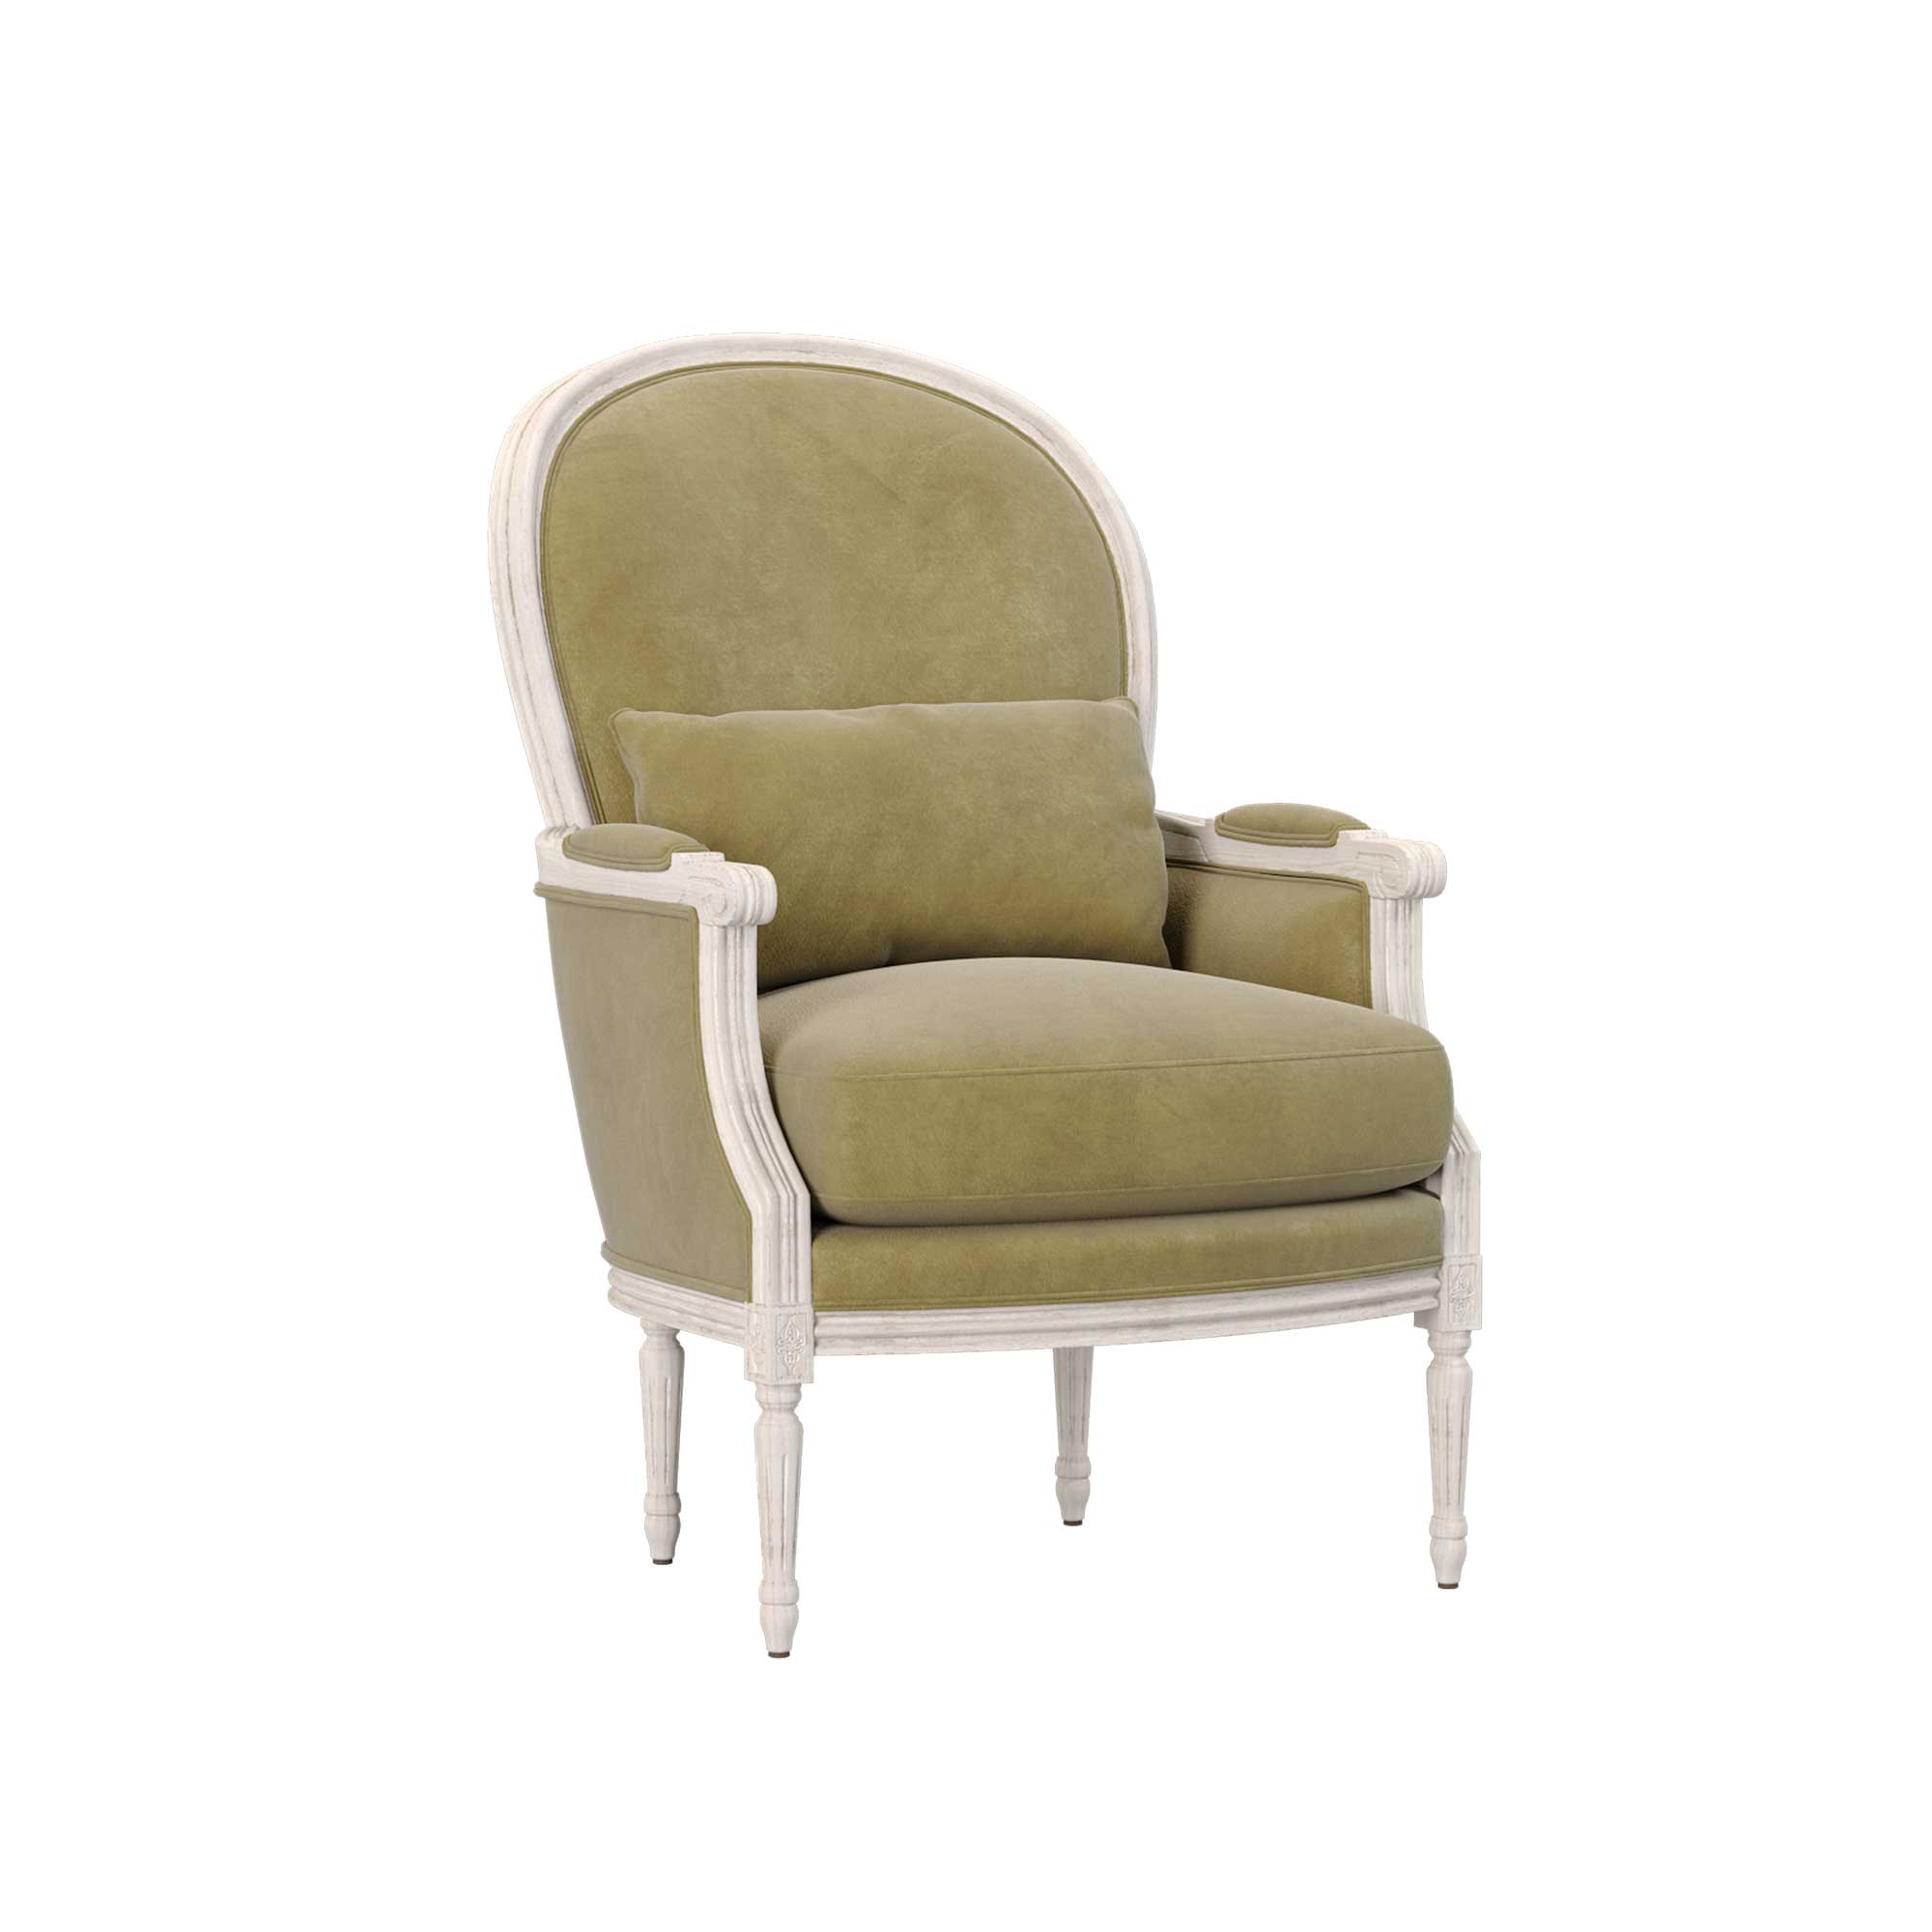 Adele Classic Lounge Chair in Celadon